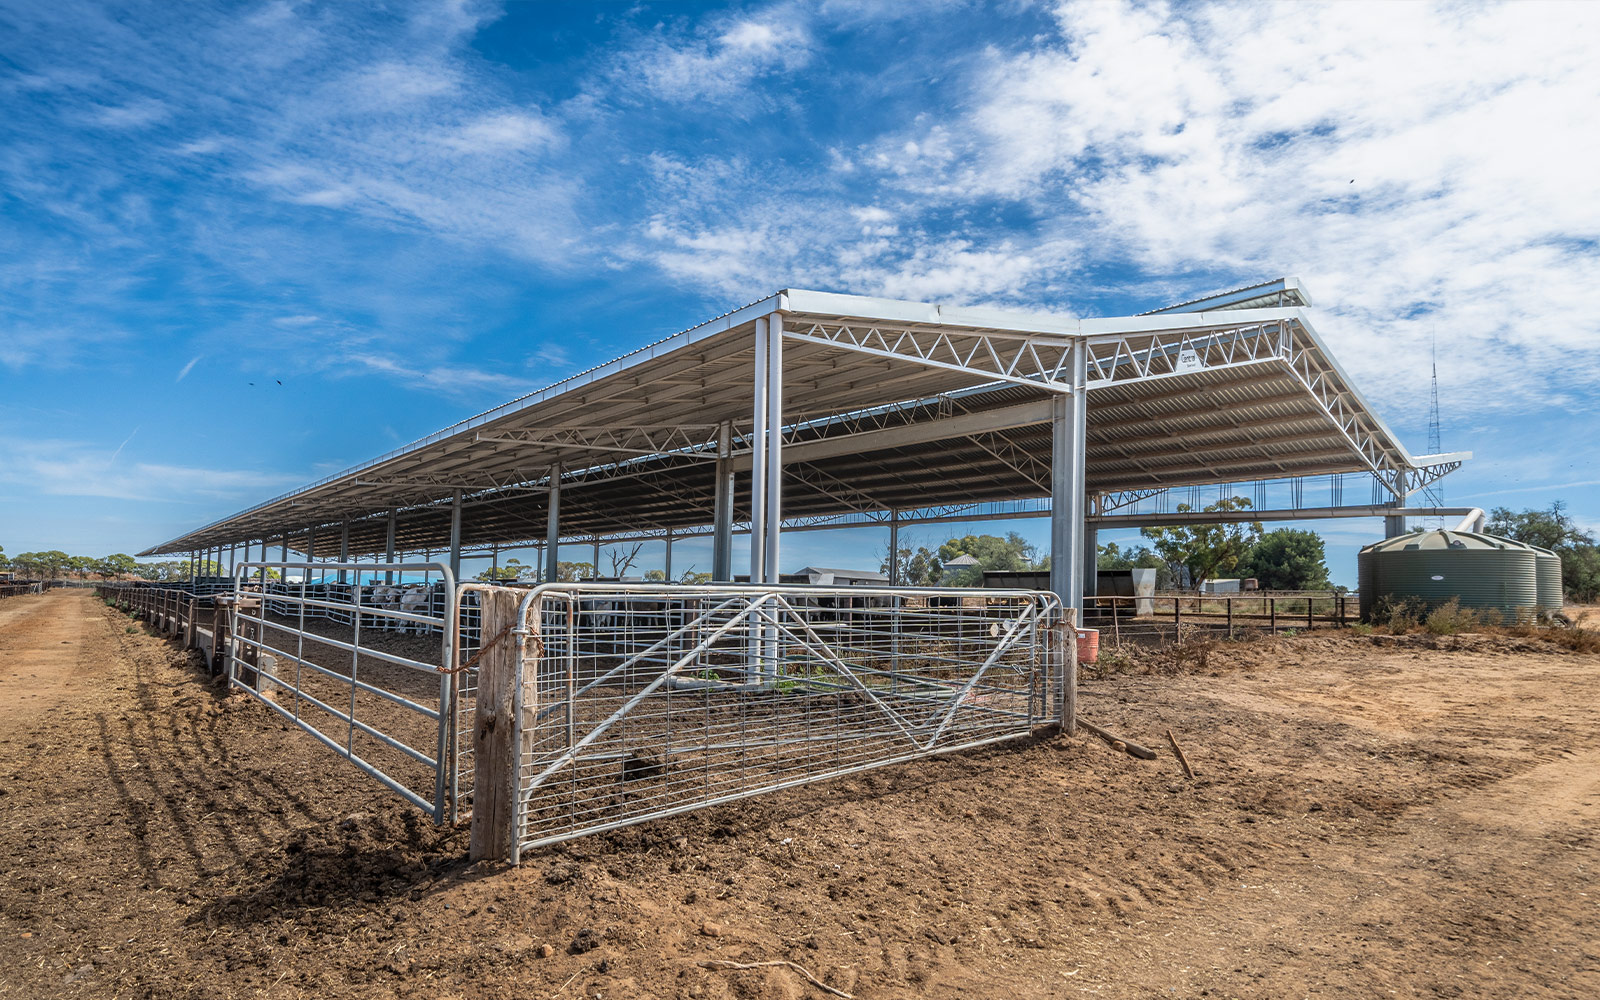 Darren Rethus feedlot shed for beef cattle